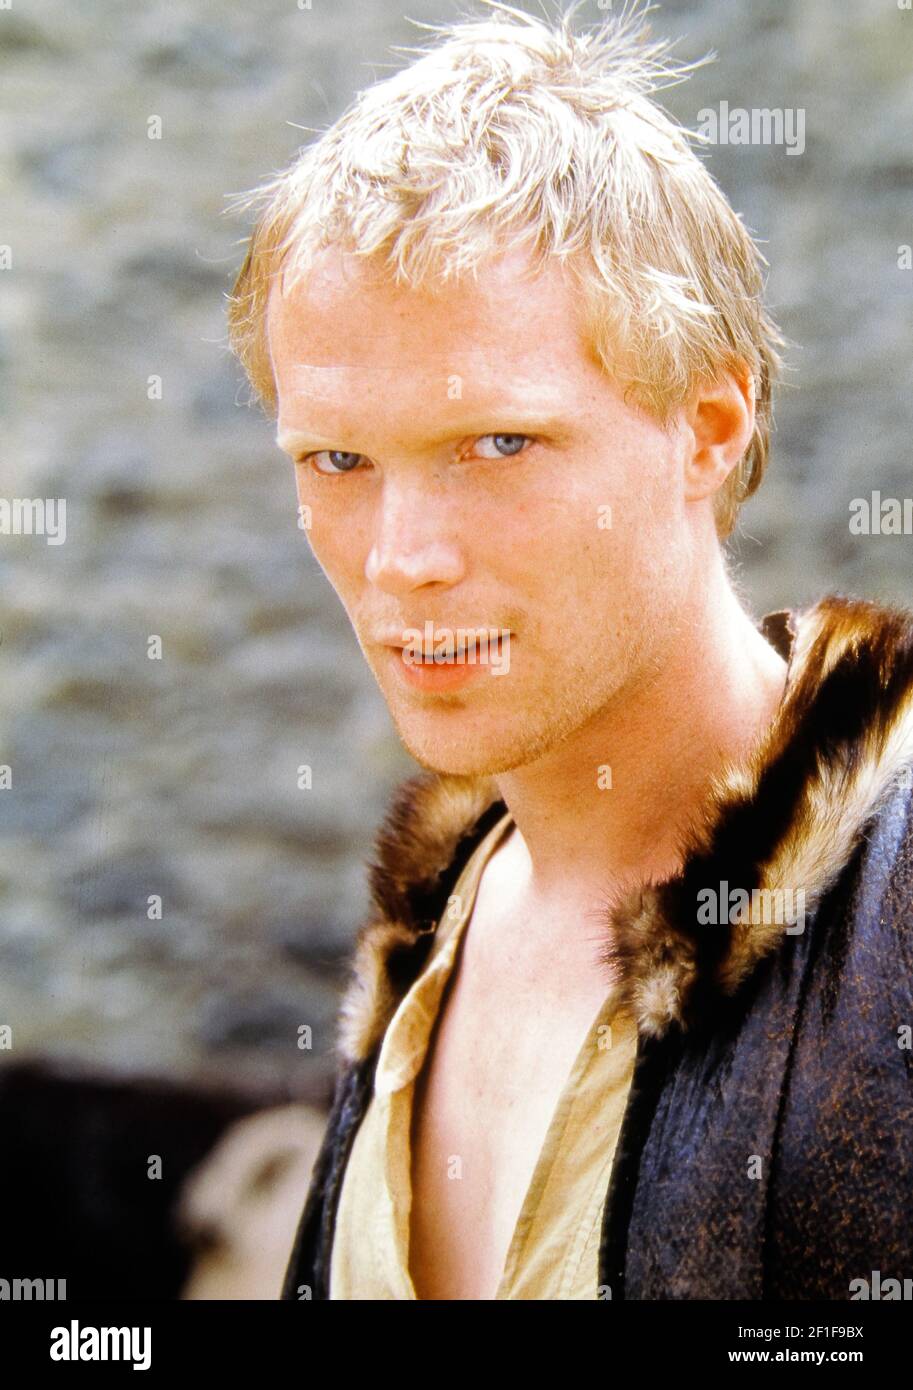 Paul Bettany, 'A Knight's Tale' (2001) Sony Pictures. Photo Credit: Egon Endrenyi/Sony Pictures/The Hollywood Archive - File Reference # 34082-1065THA Stock Photo